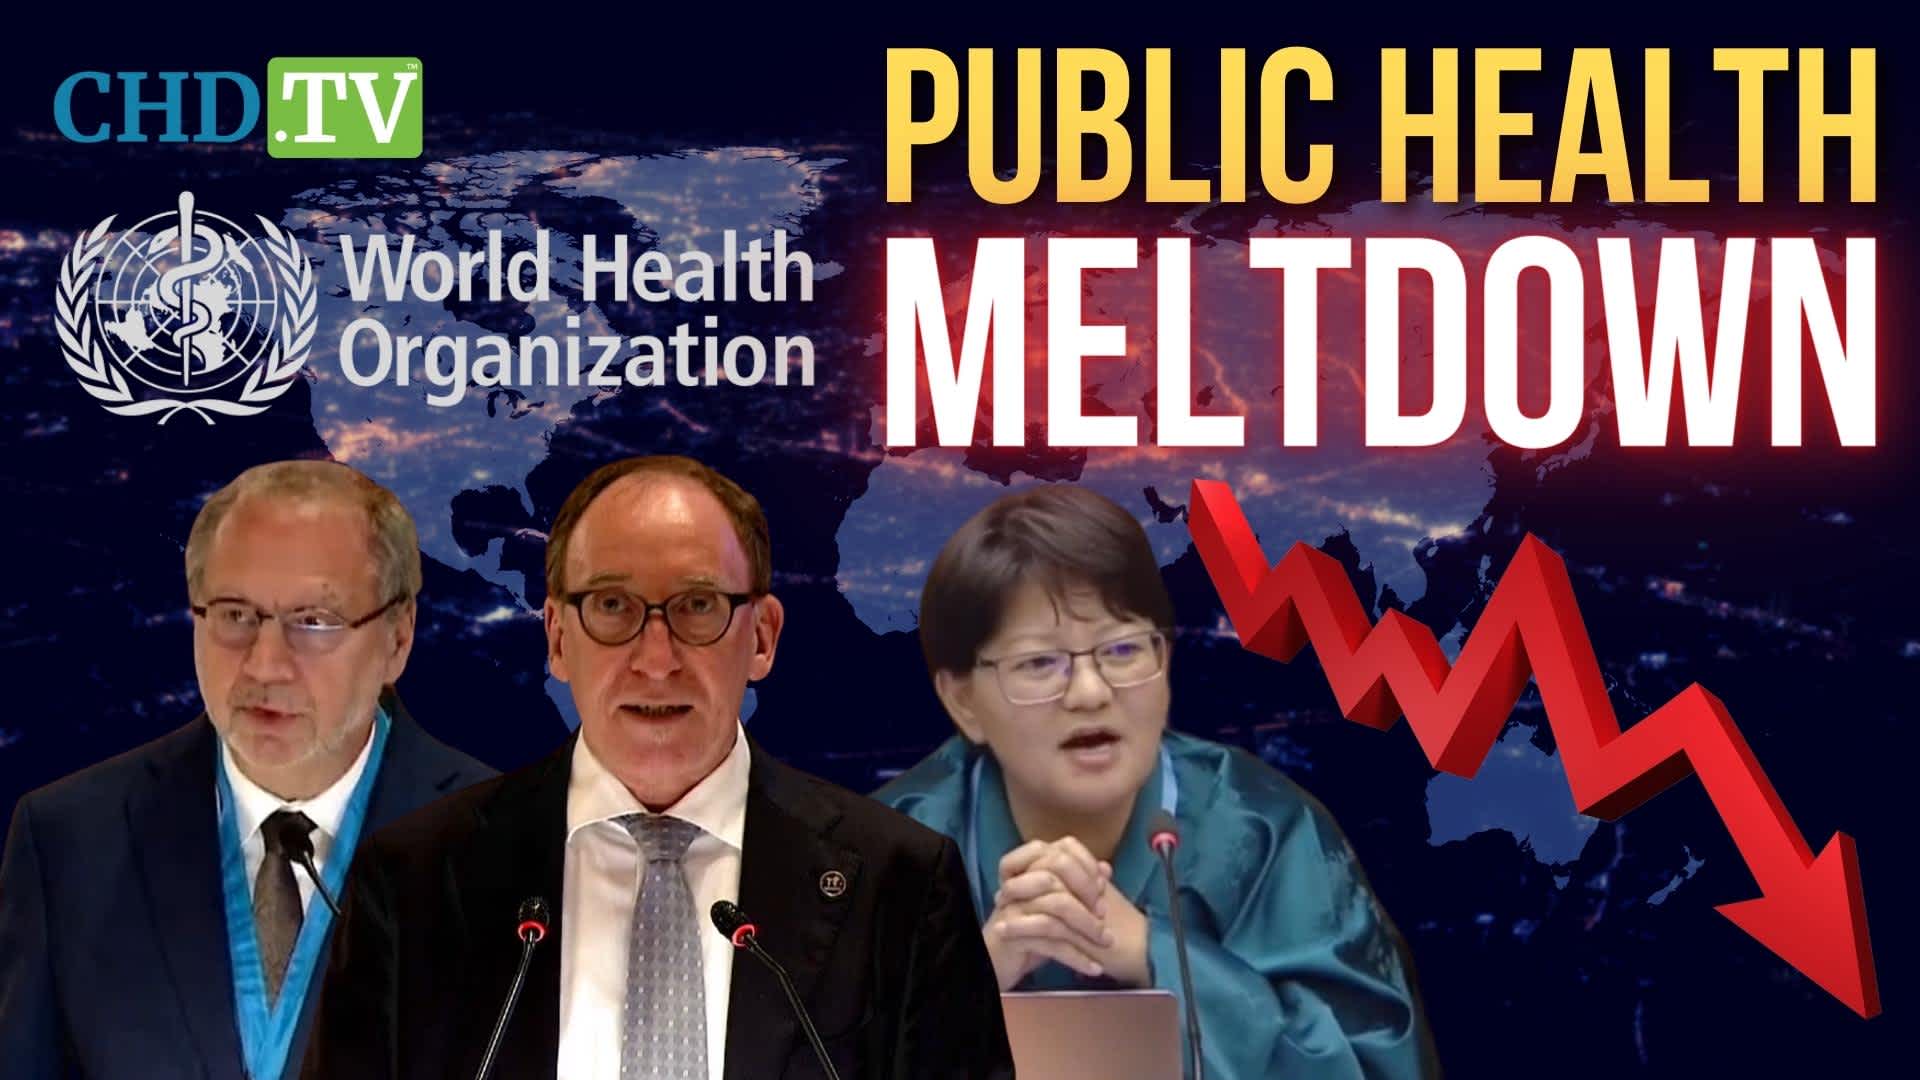 Are We the Public Health “Threat” They Want to Eliminate?